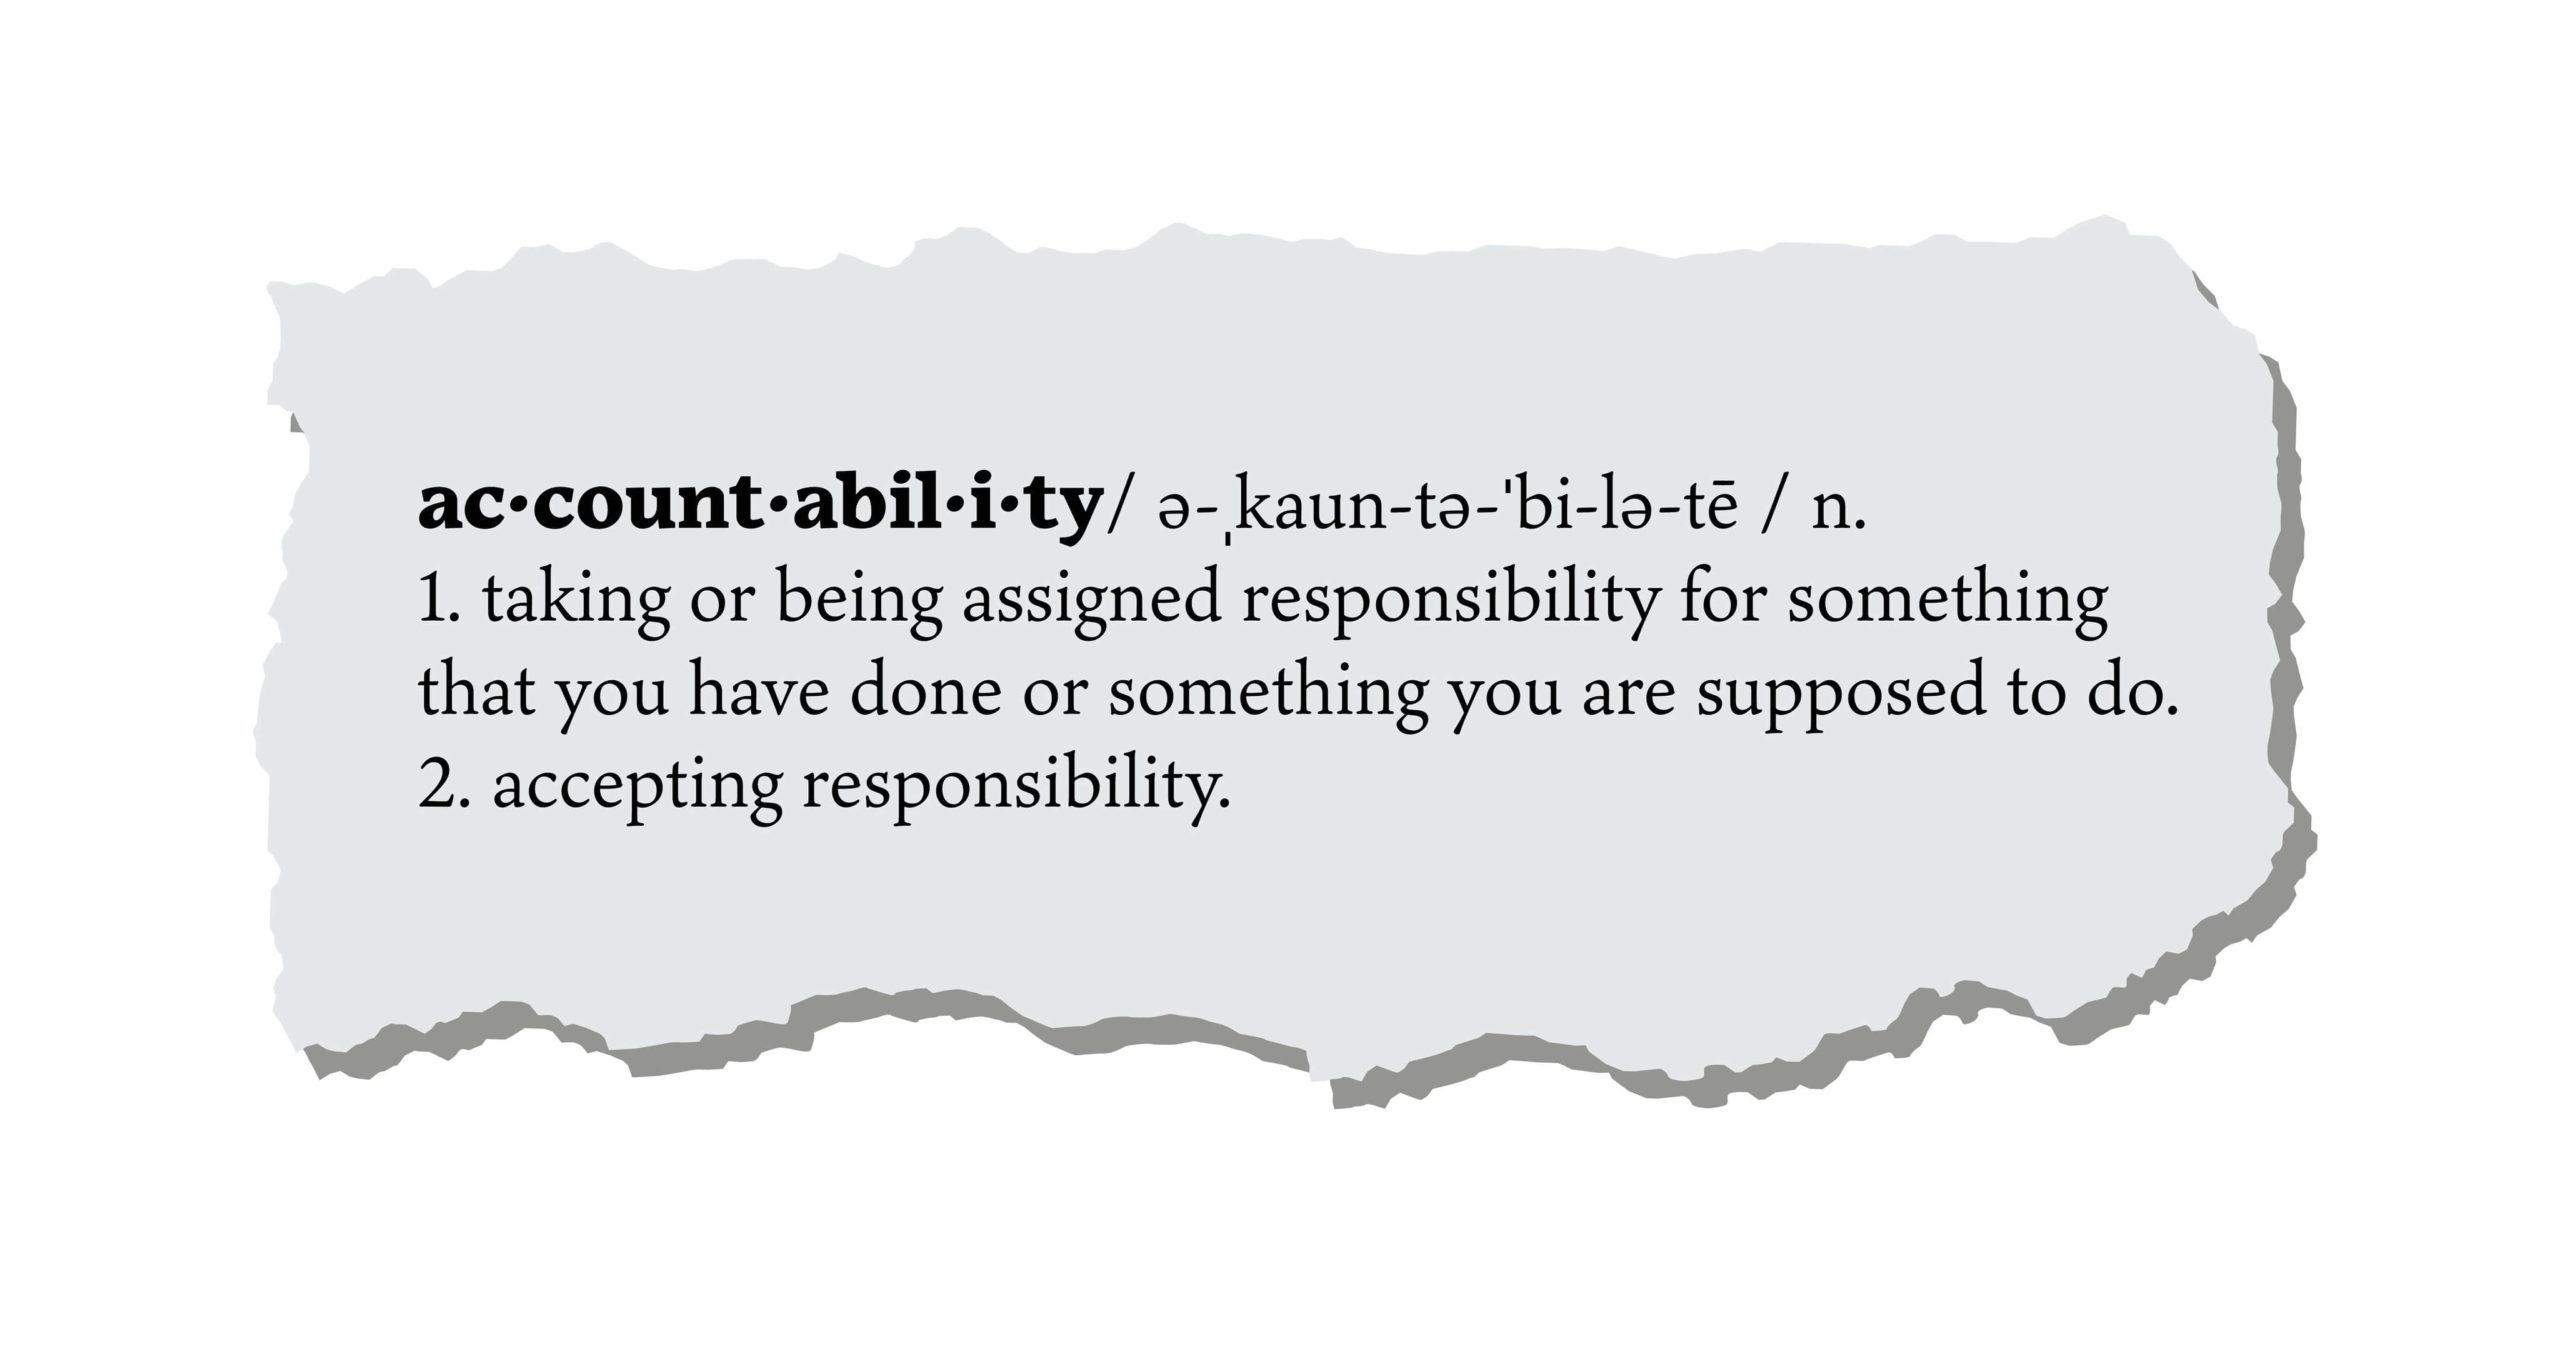 Image of the definition for accountability